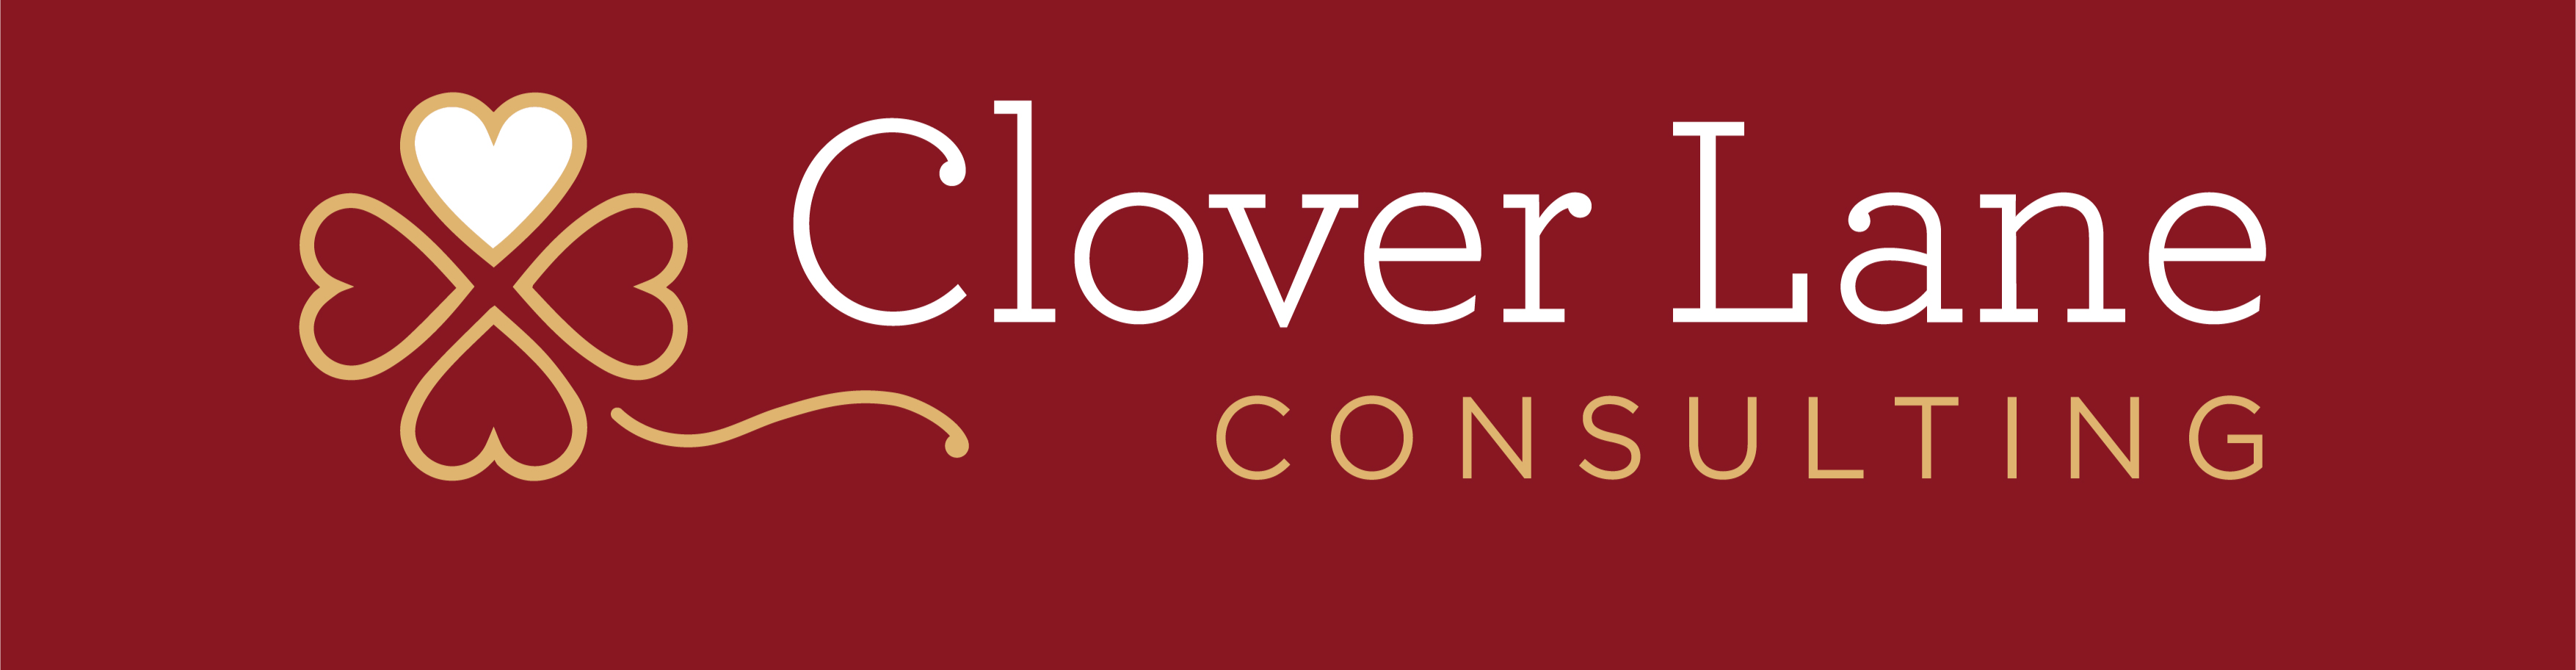 Clover Lane Consulting banner